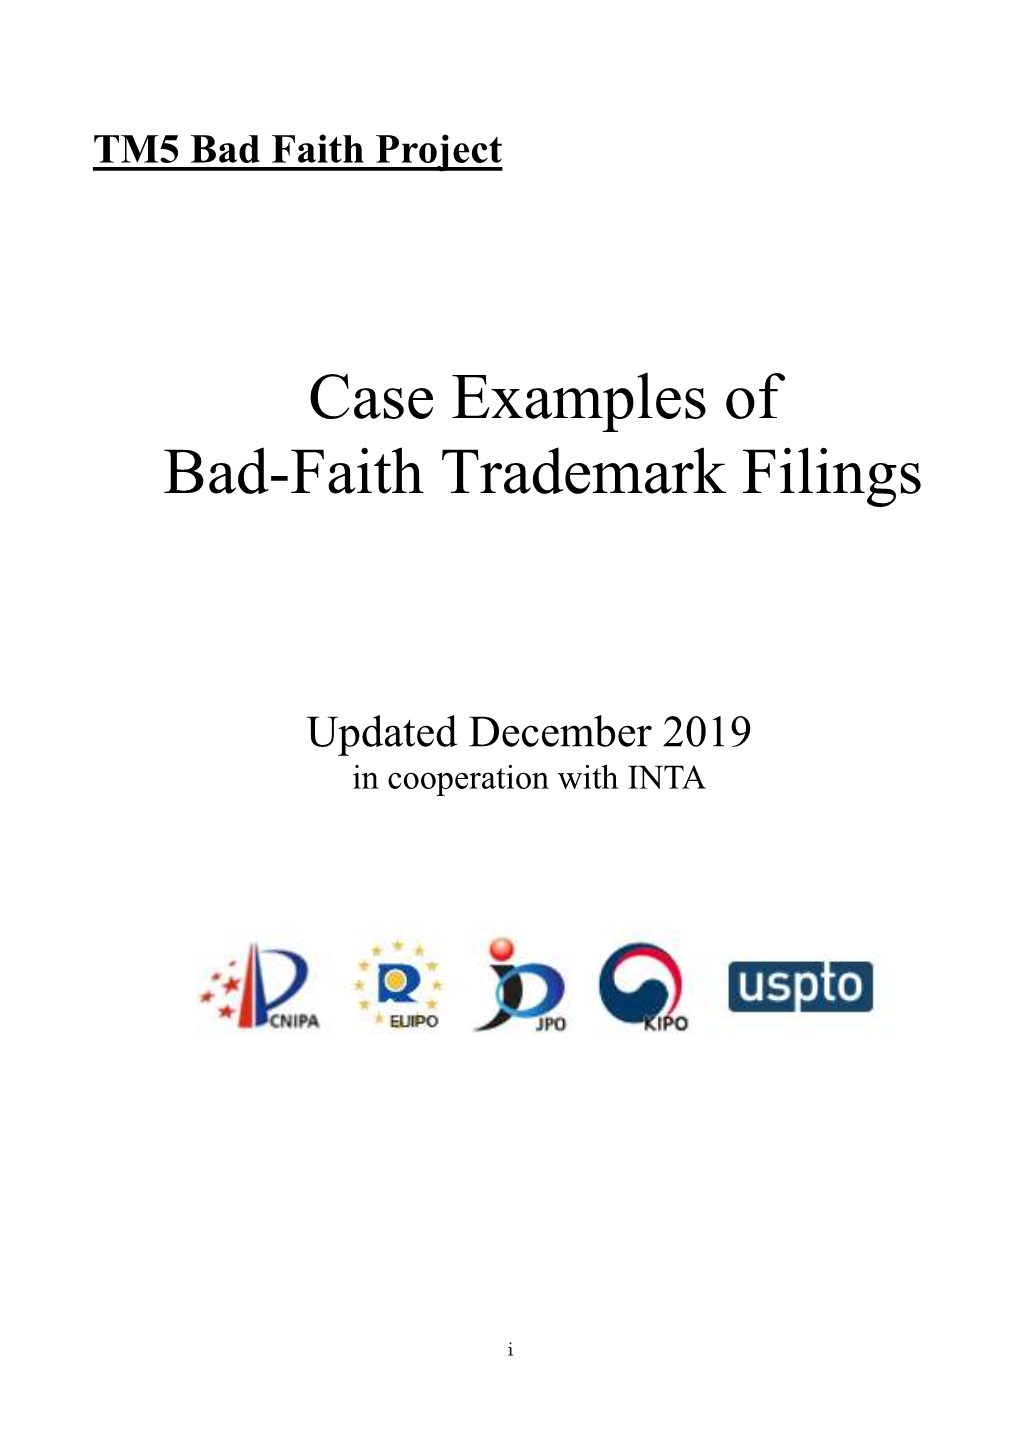 Case Examples of Bad-Faith Trademark Filings